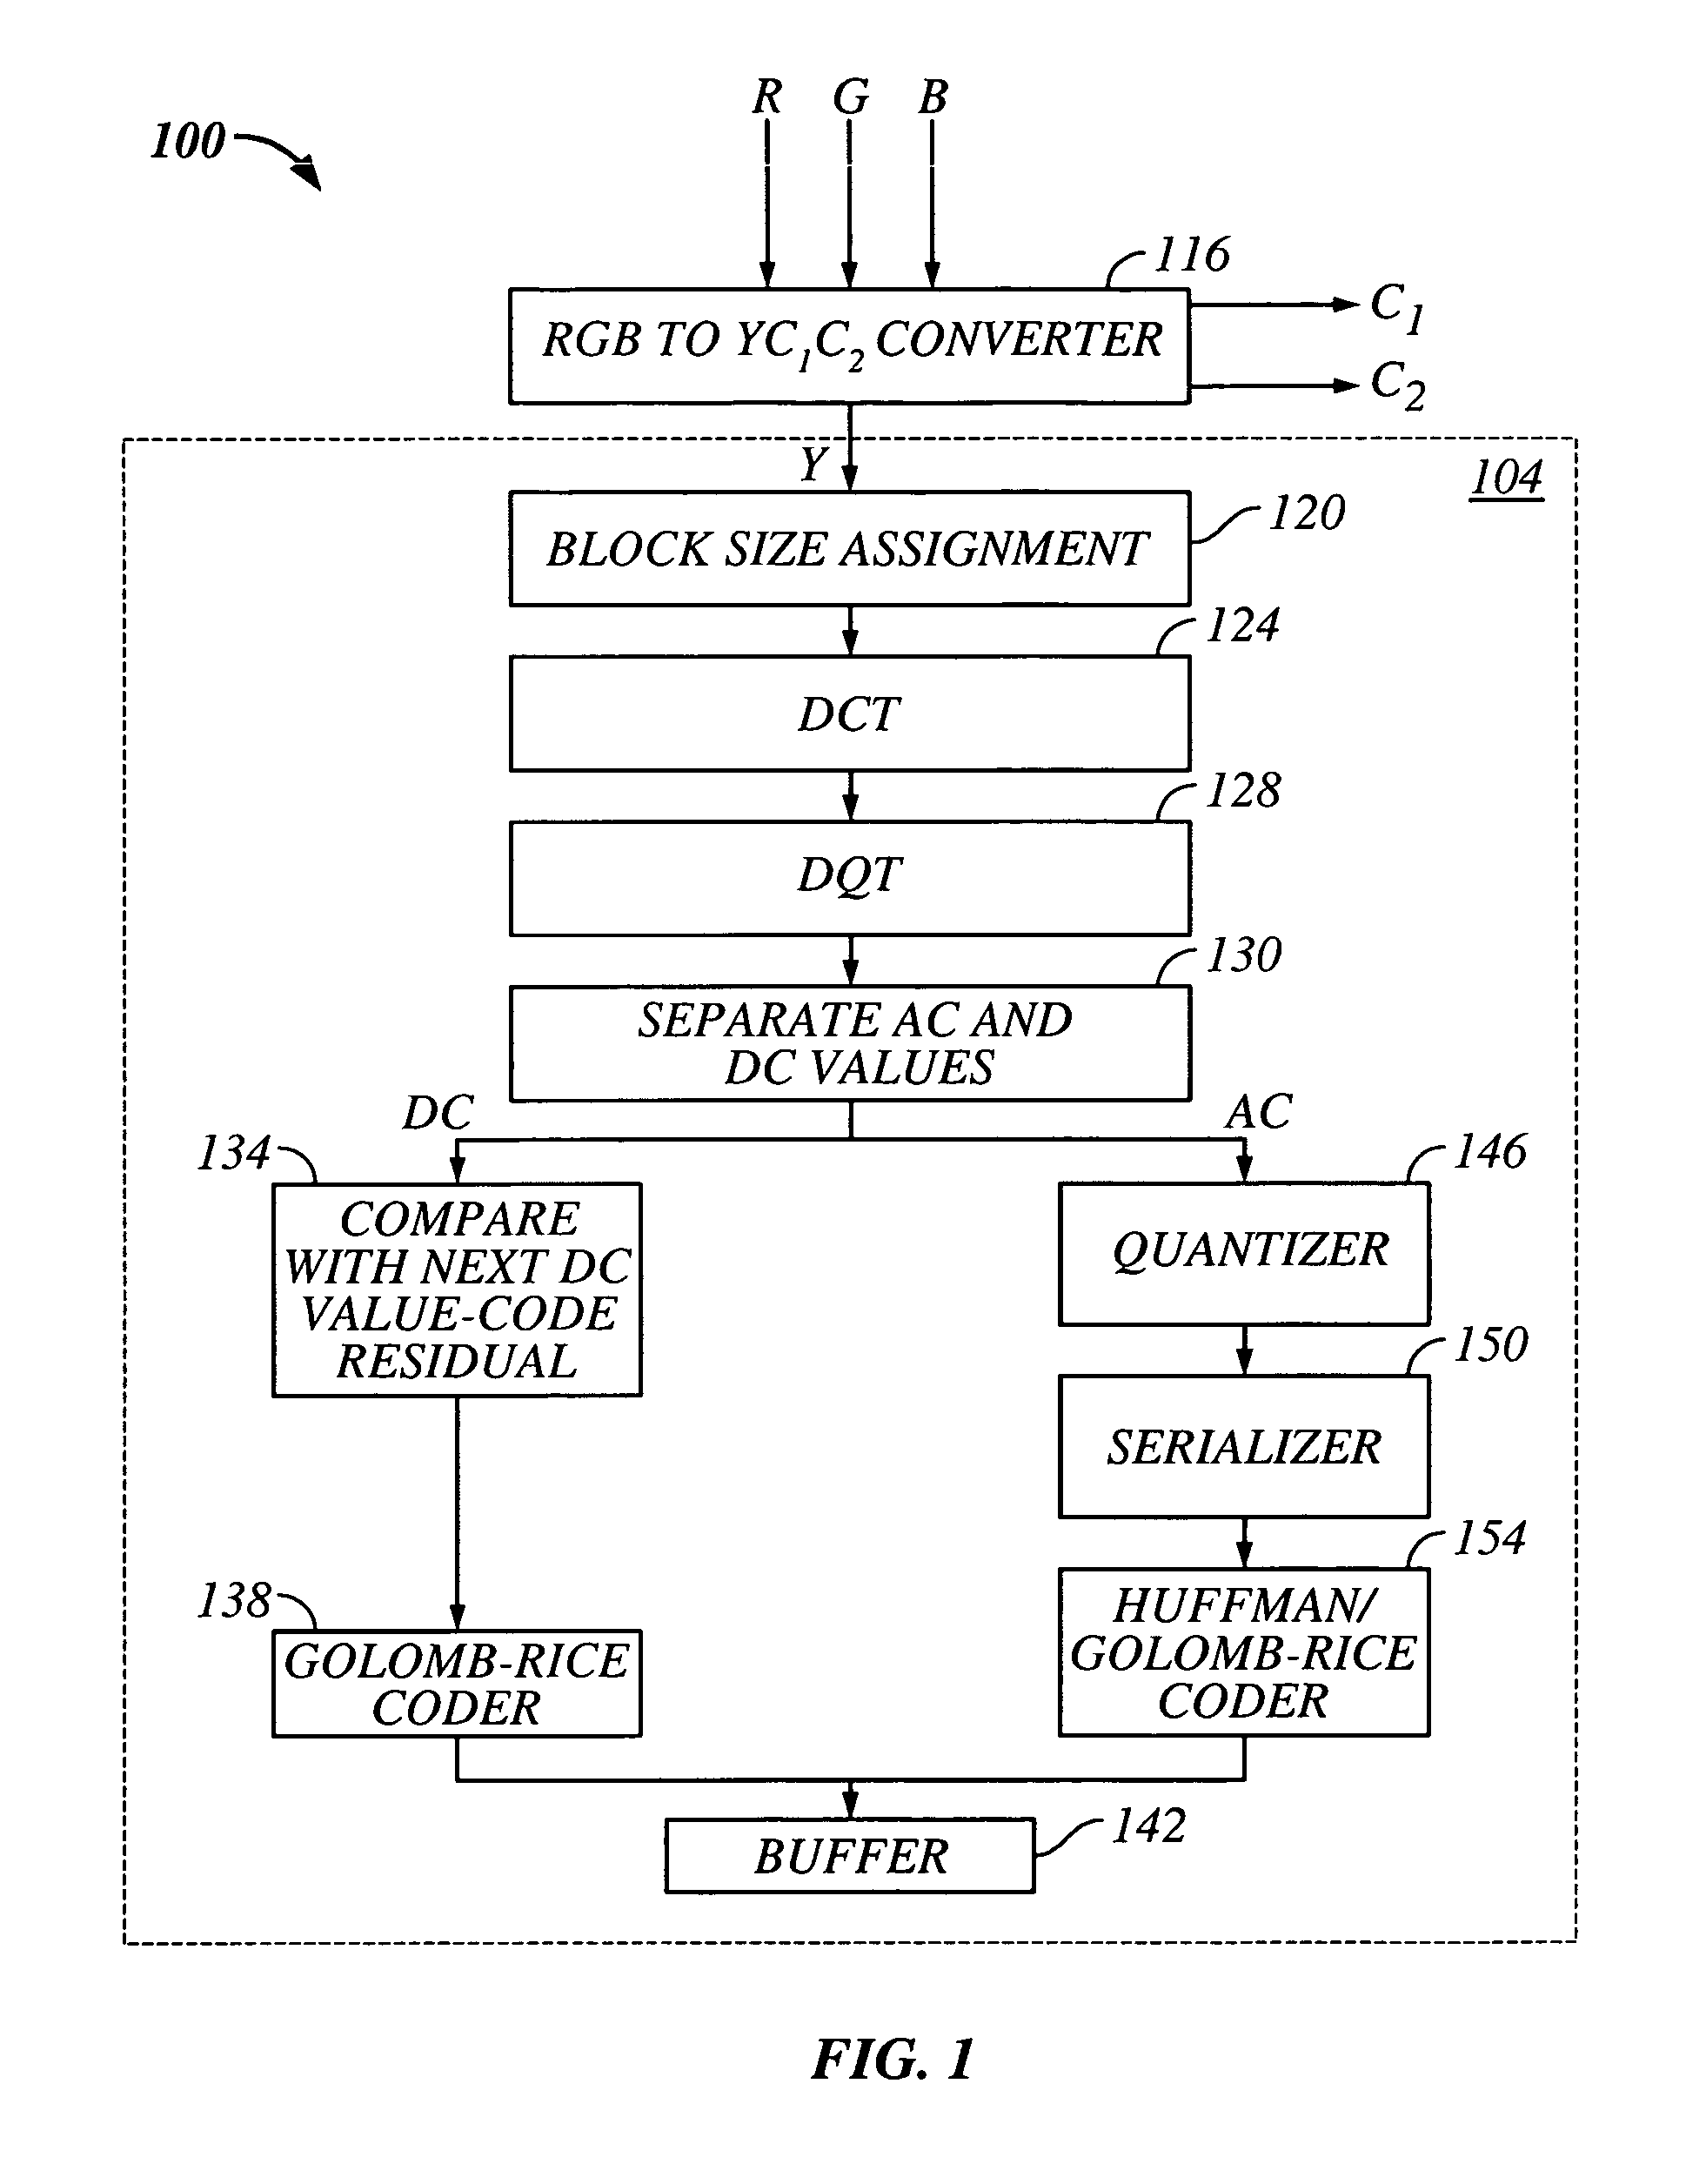 Apparatus and method for encoding digital image data in a lossless manner